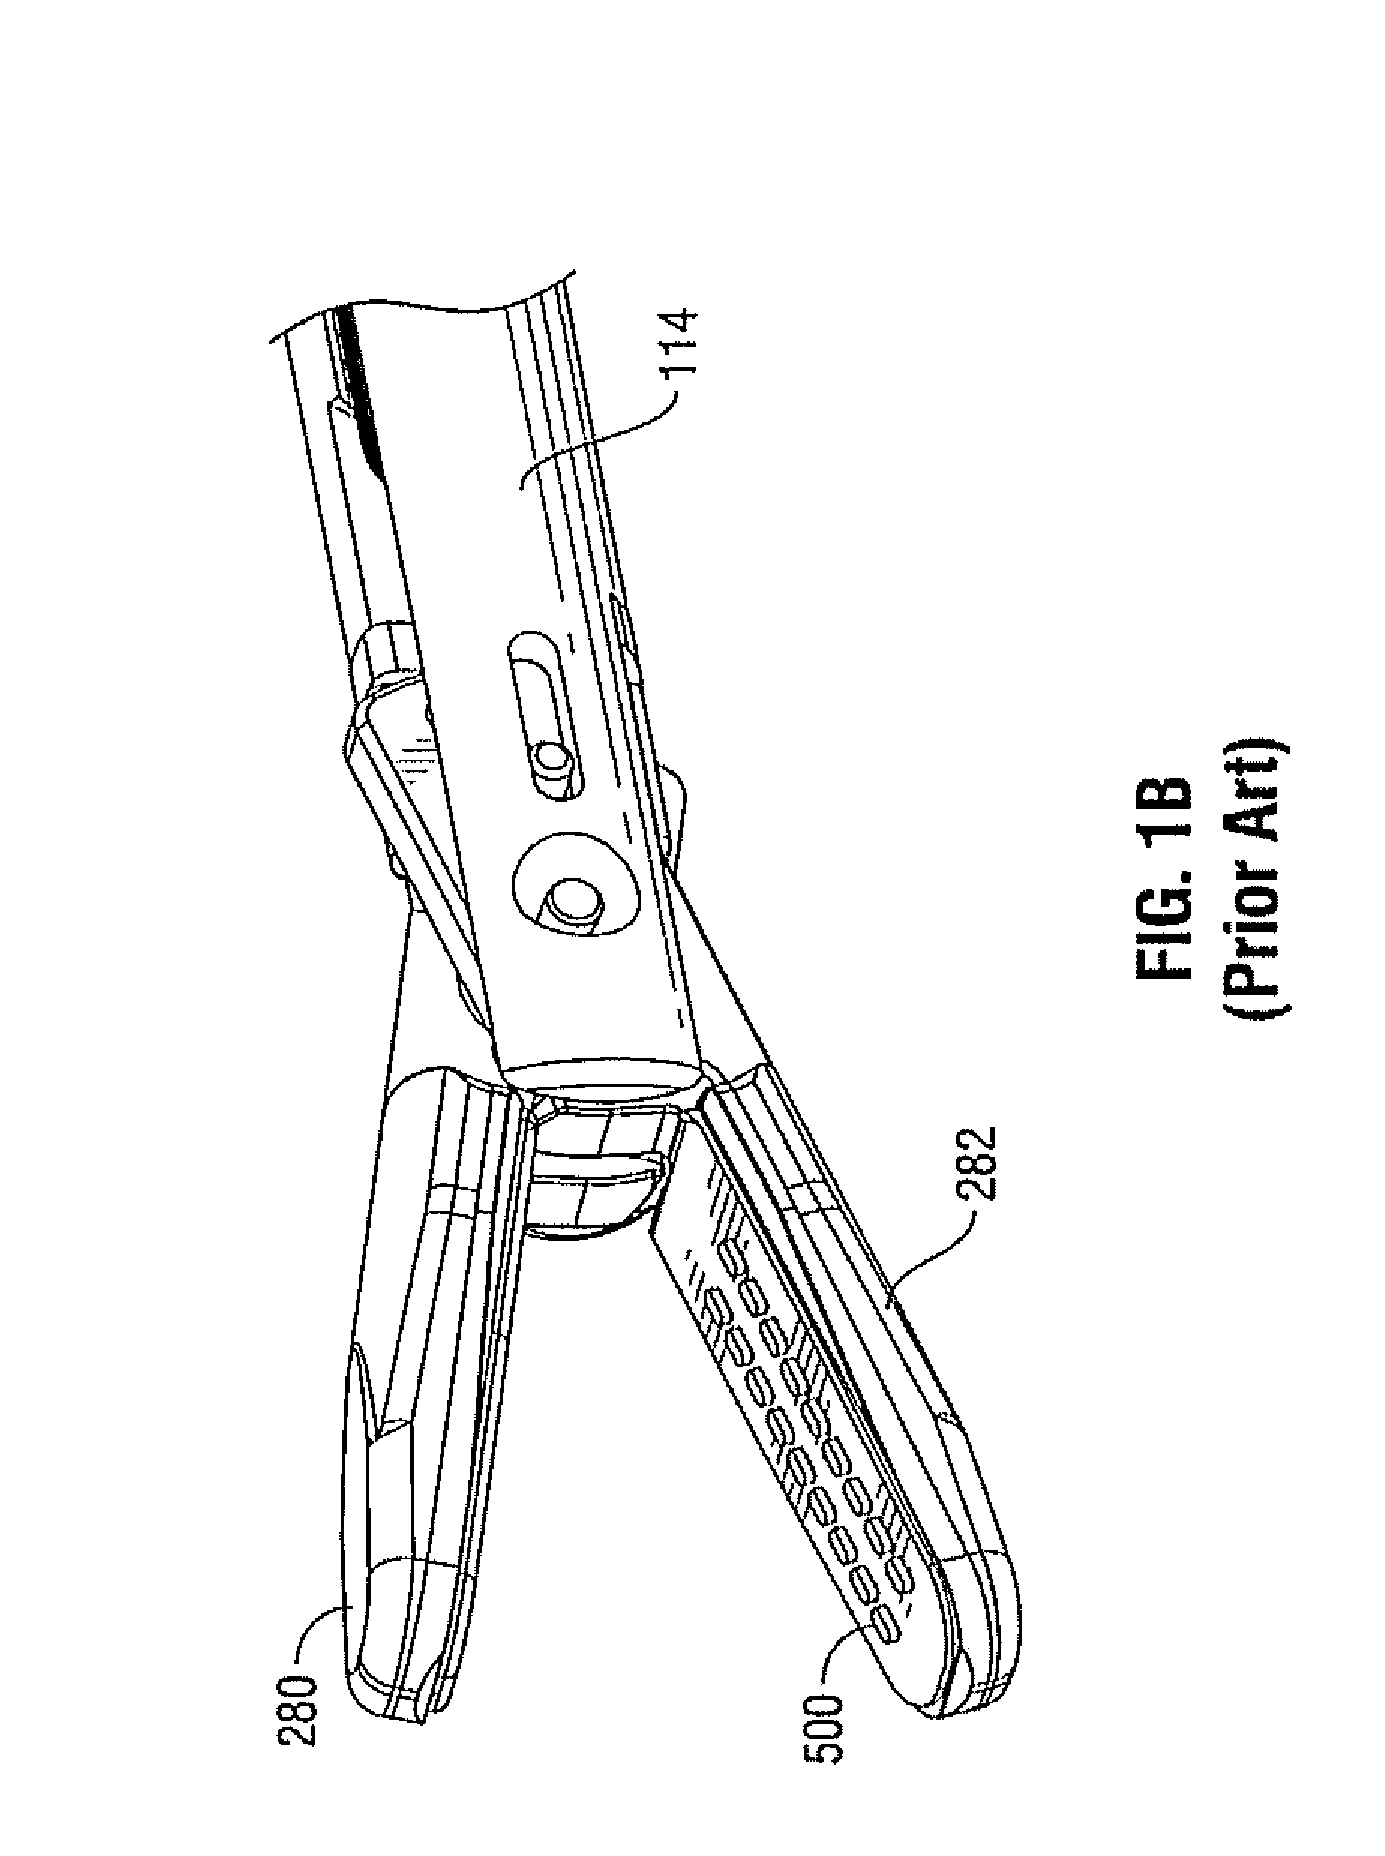 Electrically Conductive/Insulative Over Shoe for Tissue Fusion